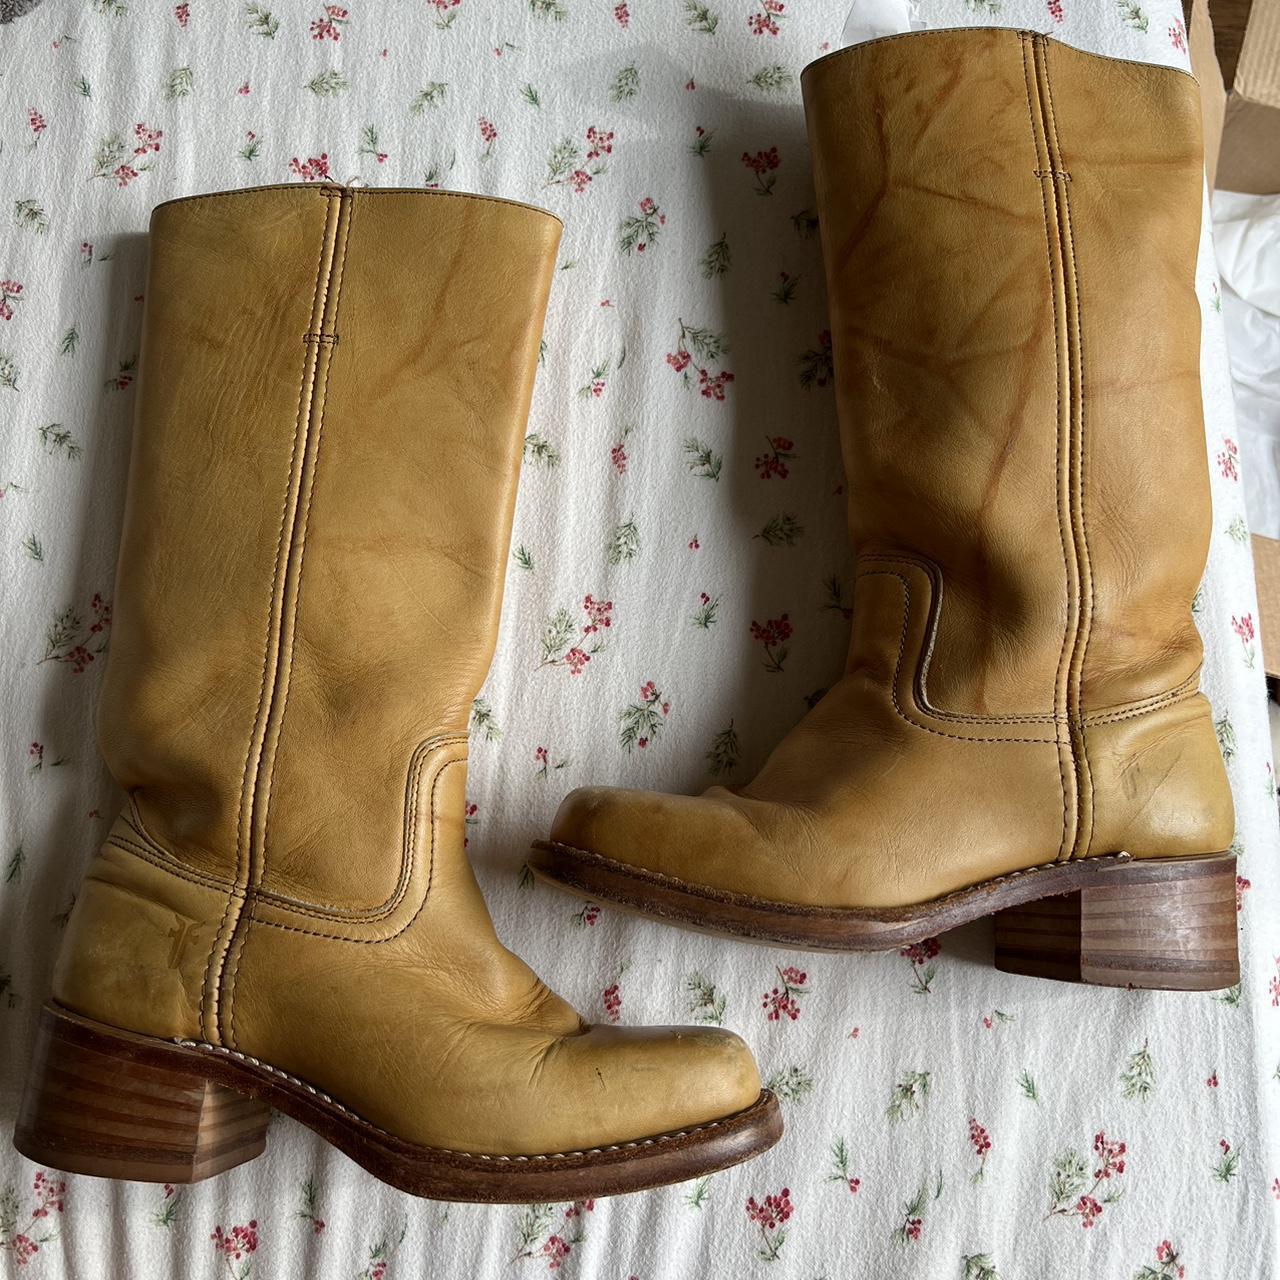 Frye Women's Tan and Brown Boots